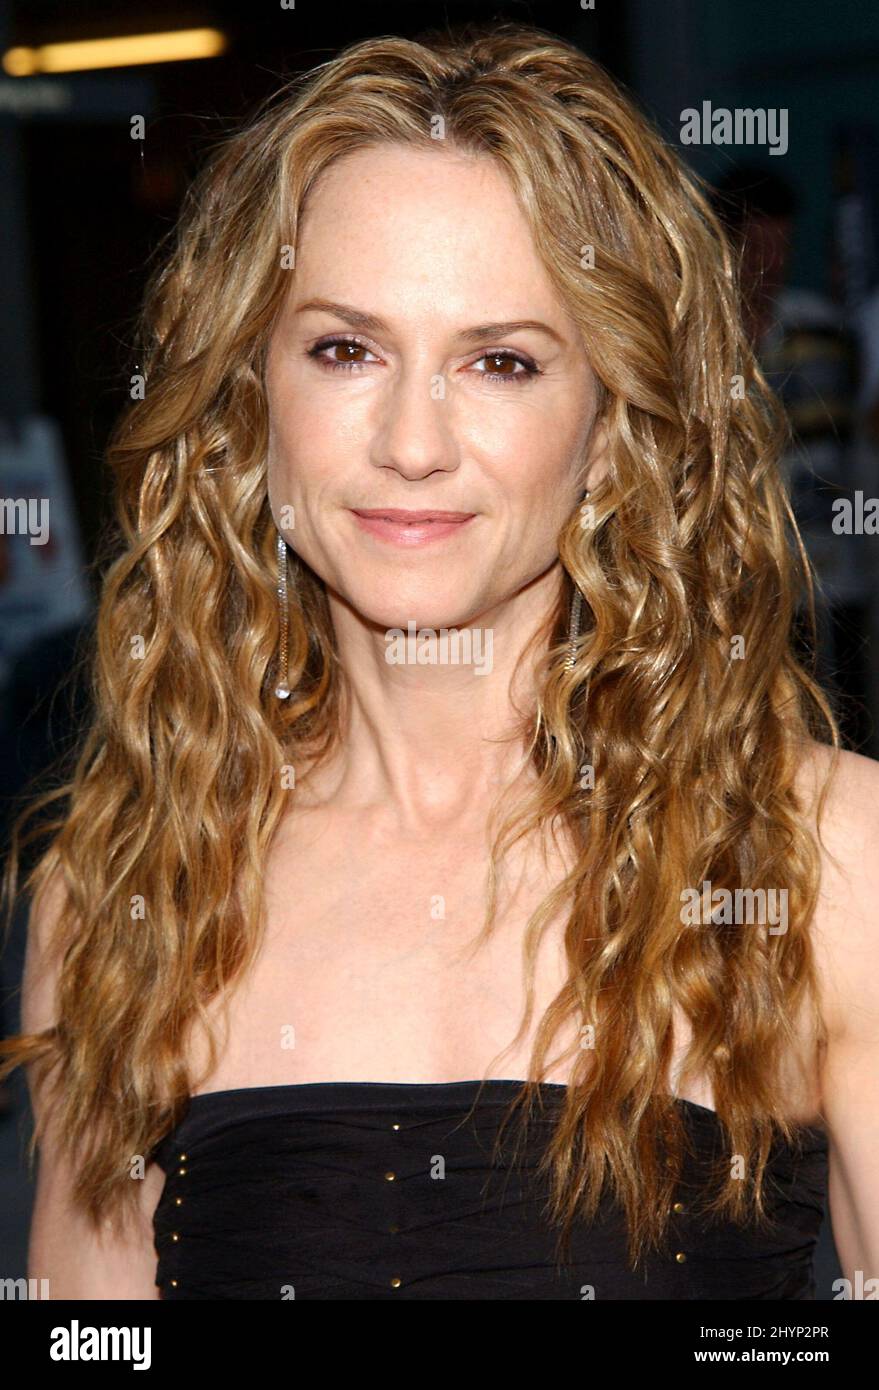 HOLLY HUNTER ATTENDS THE 'THIRTEEN' FILM PREMIERE IN HOLLYWOOD. PICTURE: UK PRESS Stock Photo